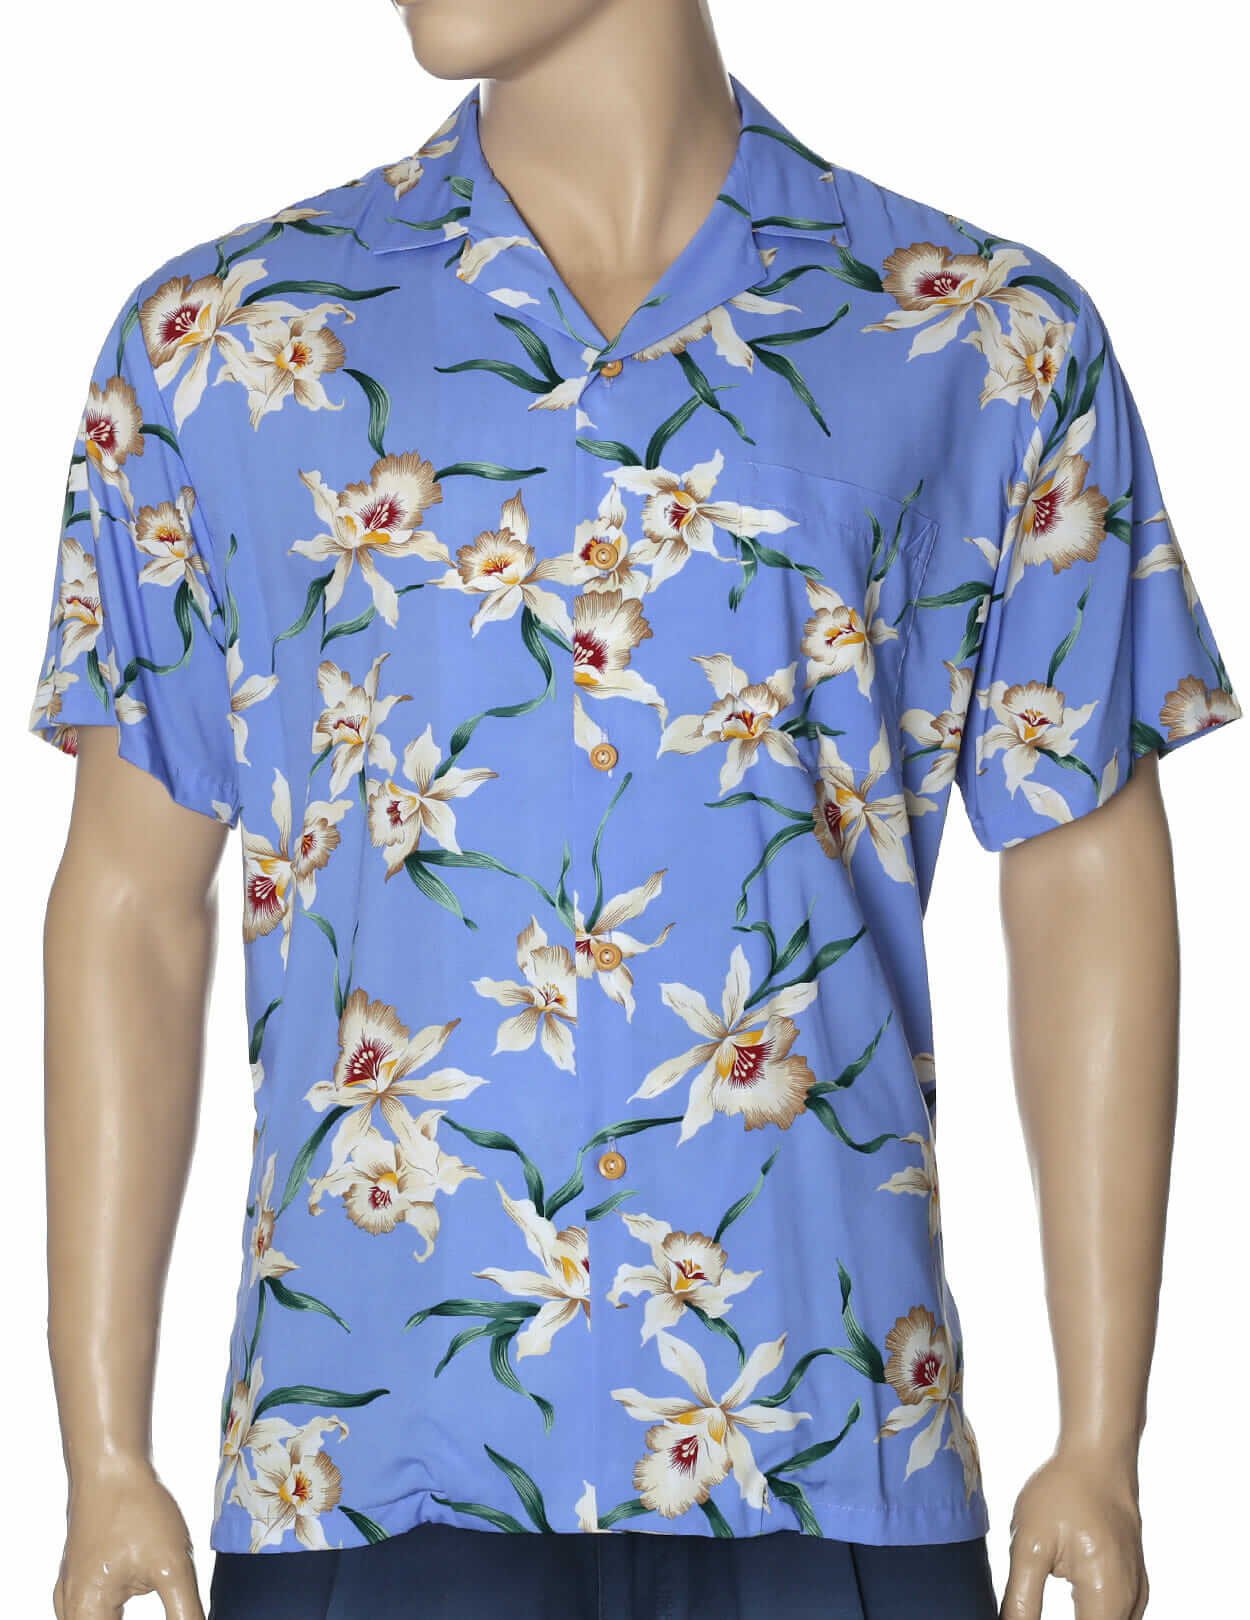 Magnum PI Star Orchid Rayon Periwinkle Shirt